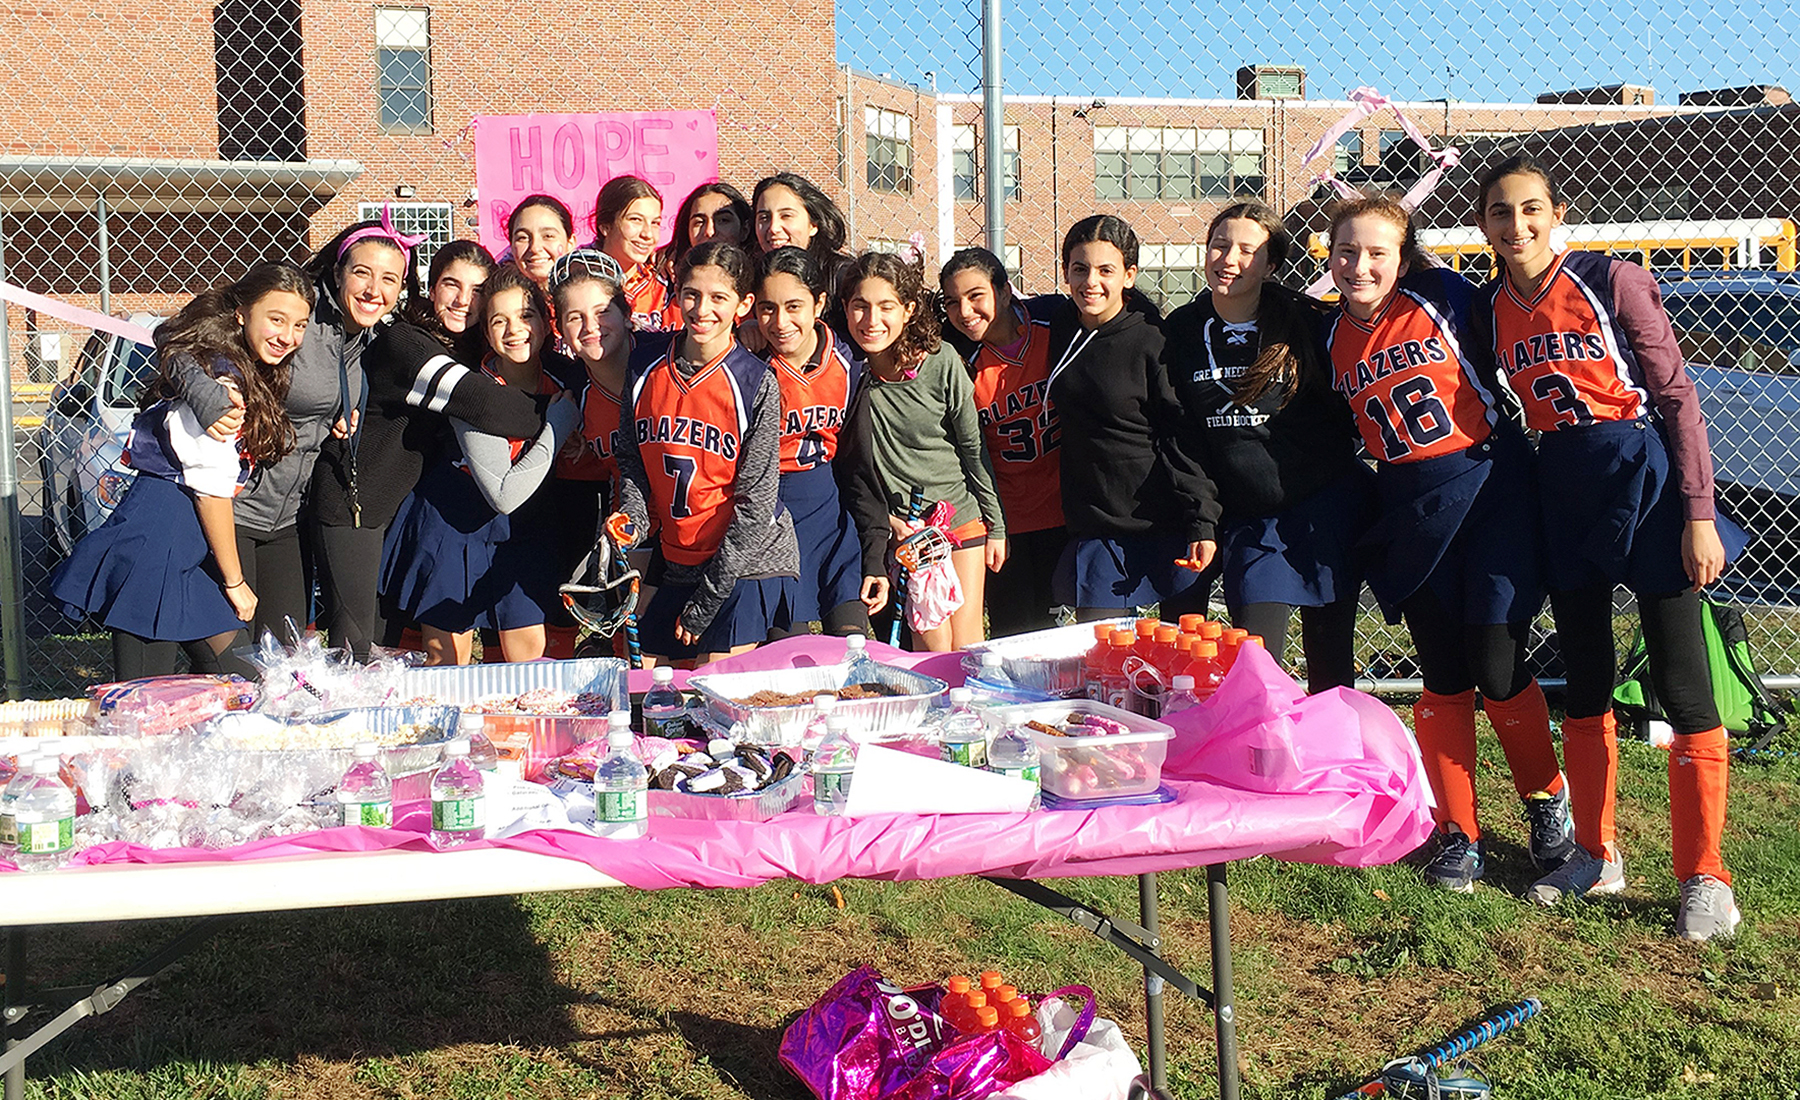 North Middle Girls Field Hockey team’s bake sale raised money for breast cancer awareness.